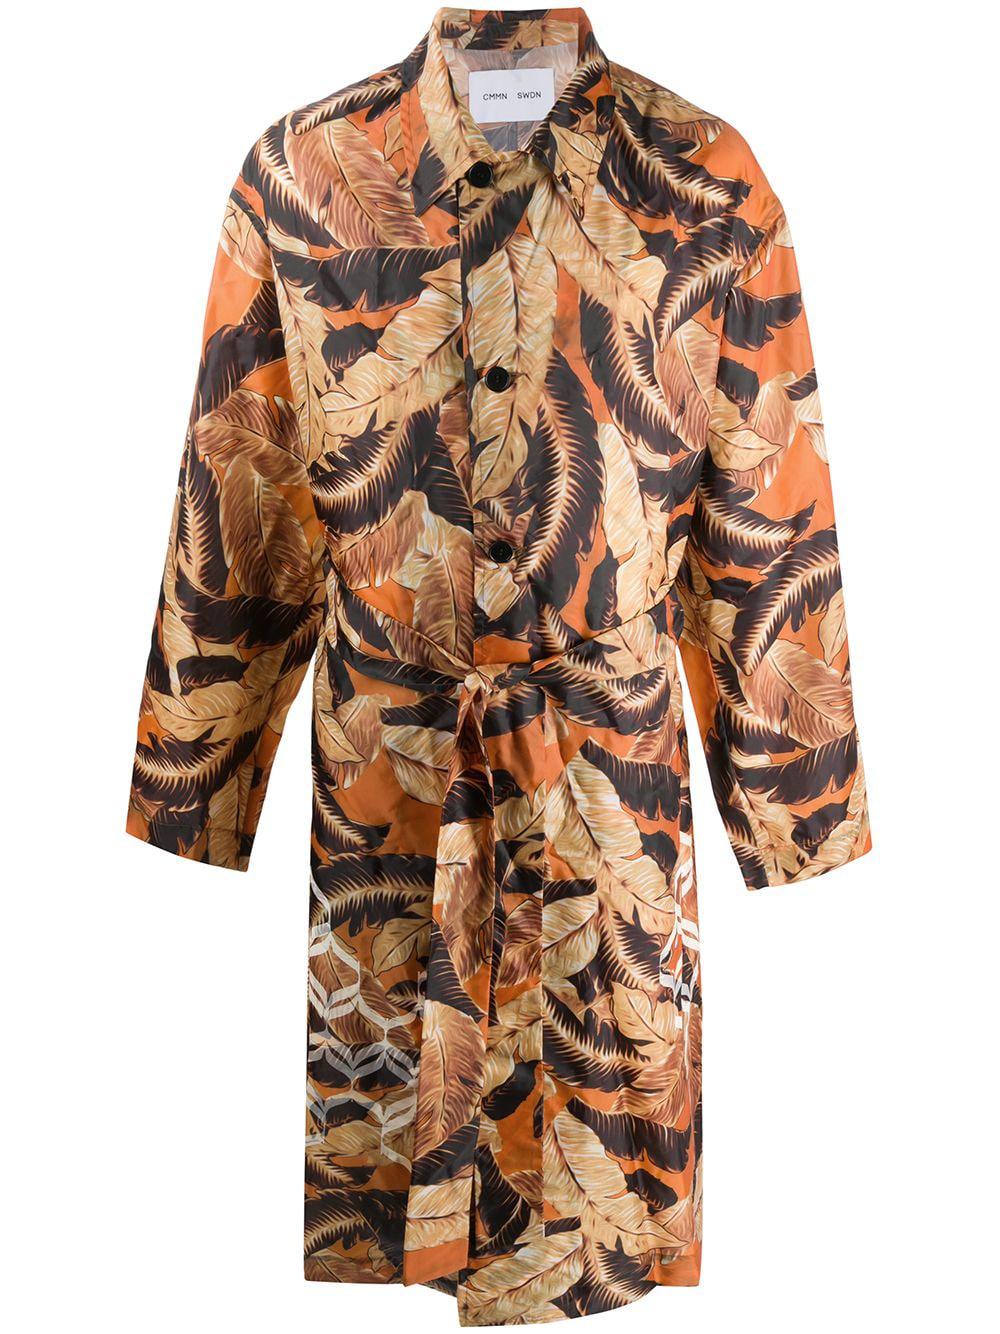 leaf-print belted trench coat by CMMN SWDN